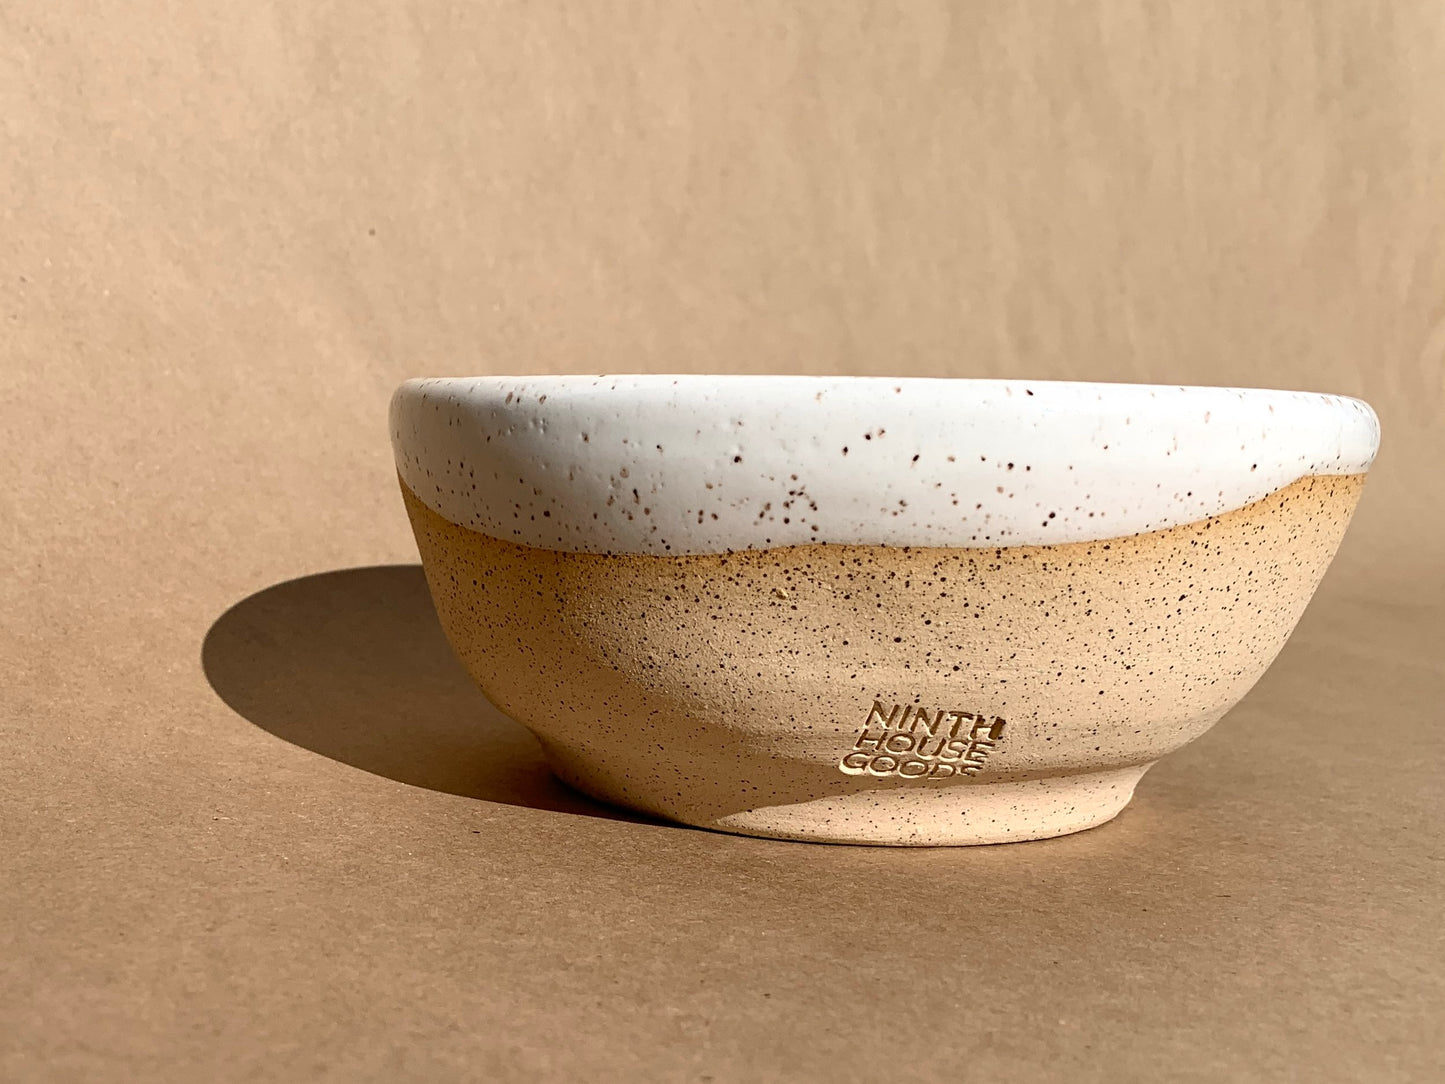 Beautiful smooth bowl great for soup and pasta or simply use it as a catchall. Hand thrown speckled clay with a white gloss glaze.